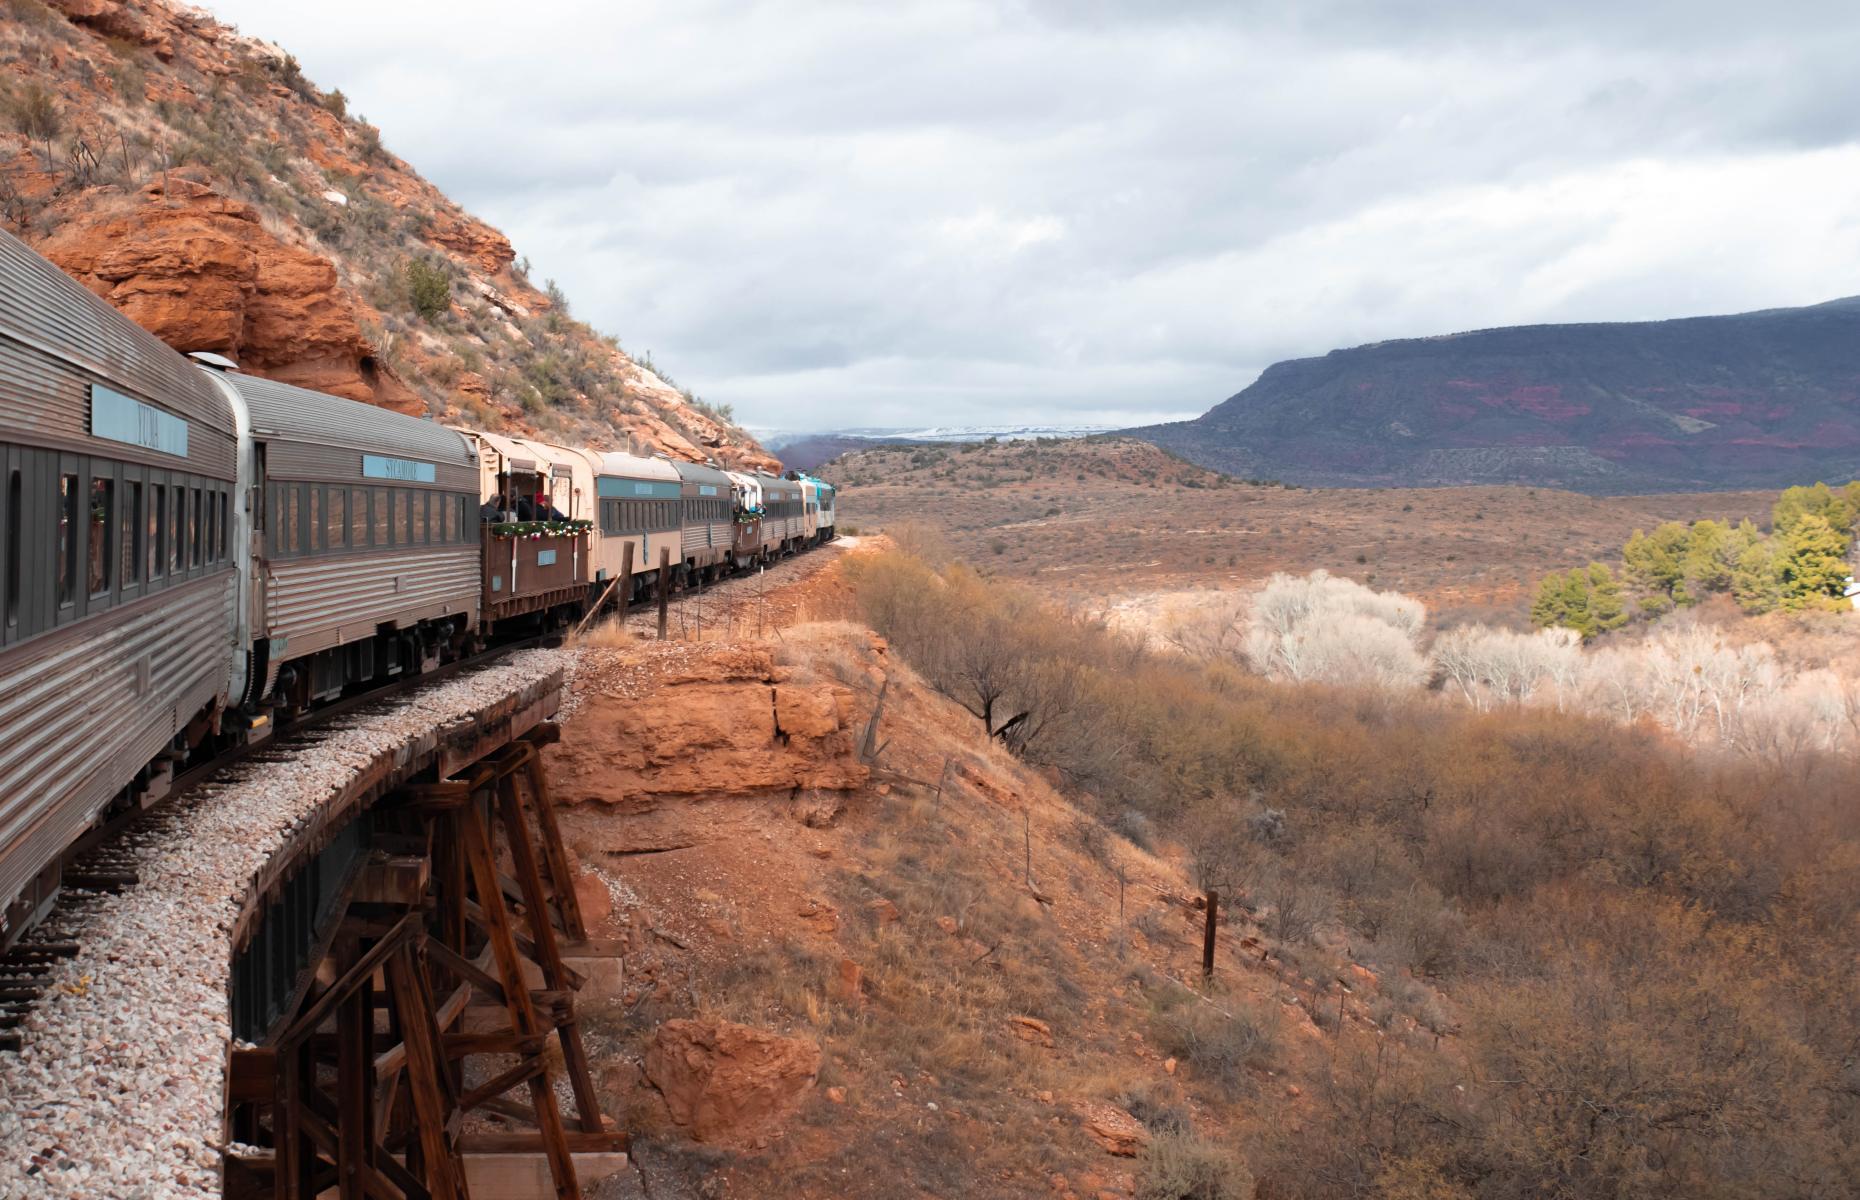 <p>There’s more than one spectacular canyon in Arizona, and you can ride a vintage train right down the spine of this one. Verde Canyon Railroad was built in 1912 to serve the area’s copper mines and has been transporting sightseers year-round since 1990.</p>  <p>Chasing the meanders of the Verde River, this four-hour round-trip takes passengers past Mars-red rock amphitheaters, historic ranch towns, kiwi-colored cacti, and the ancient ruins of Native American civilizations. Watch for bald eagles overhead as you chug along through the wilderness.</p>